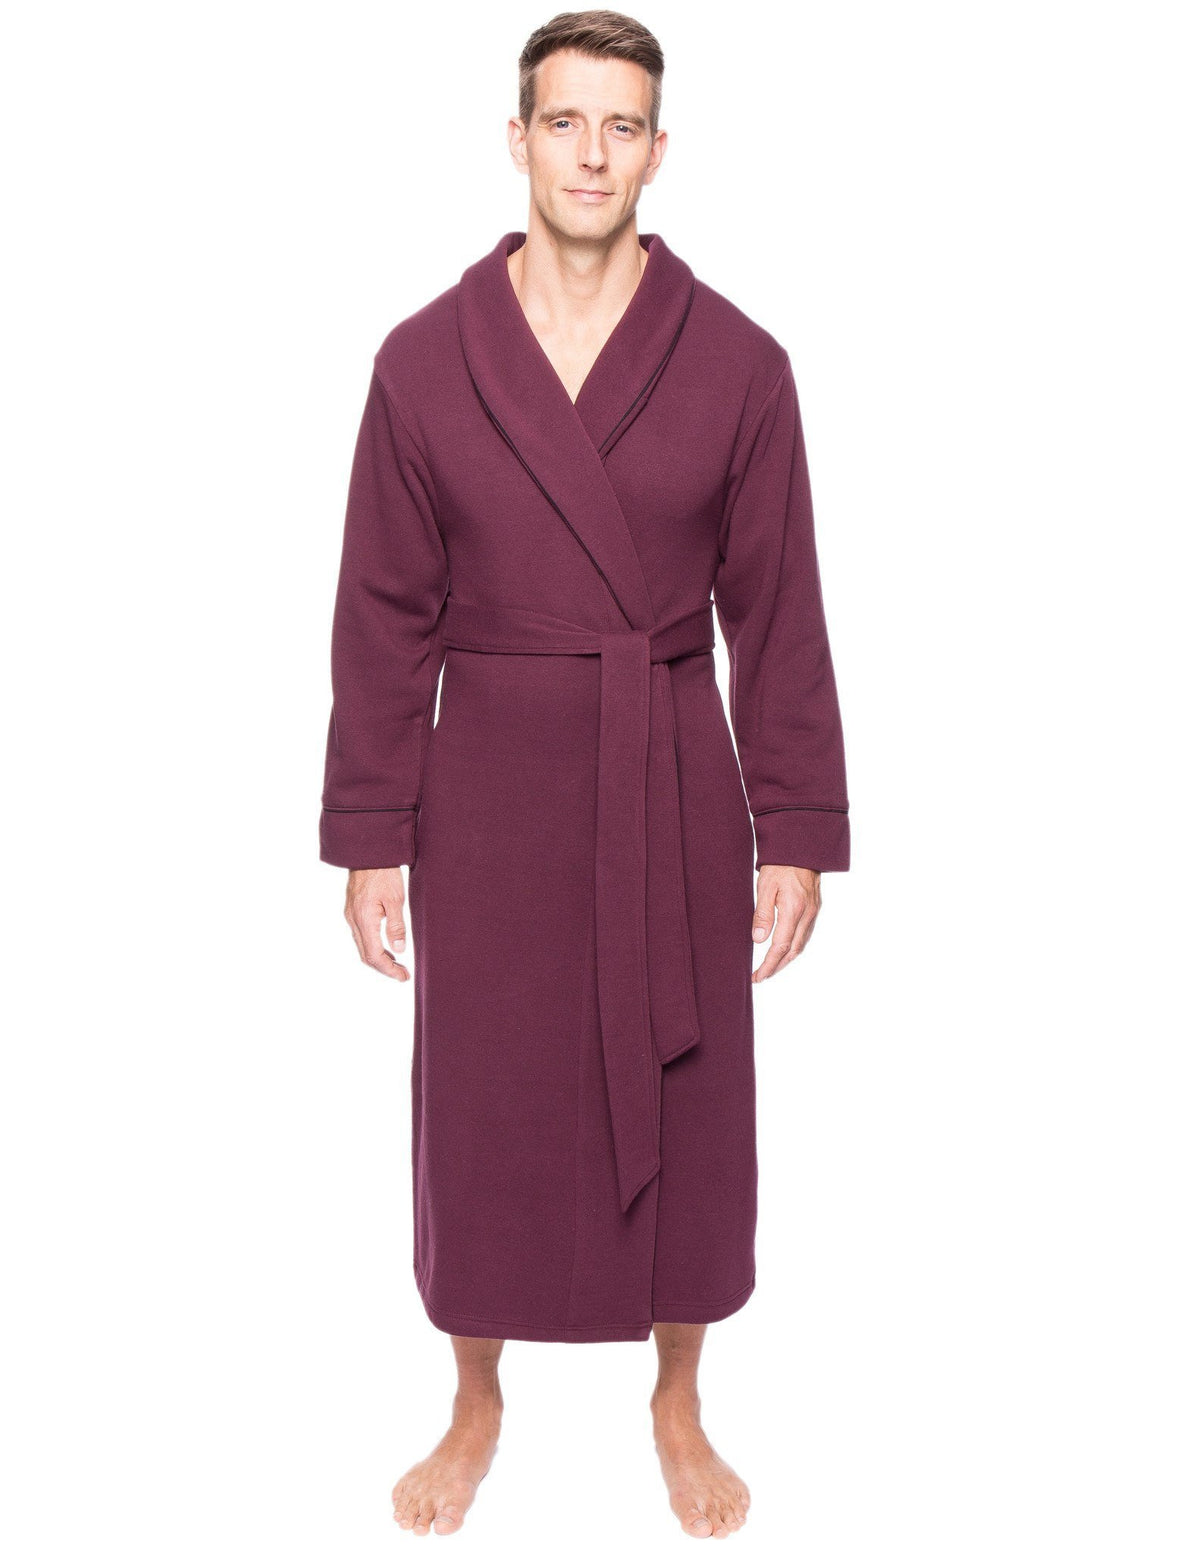 Men's Fleece Lined French Terry Robe - Fig